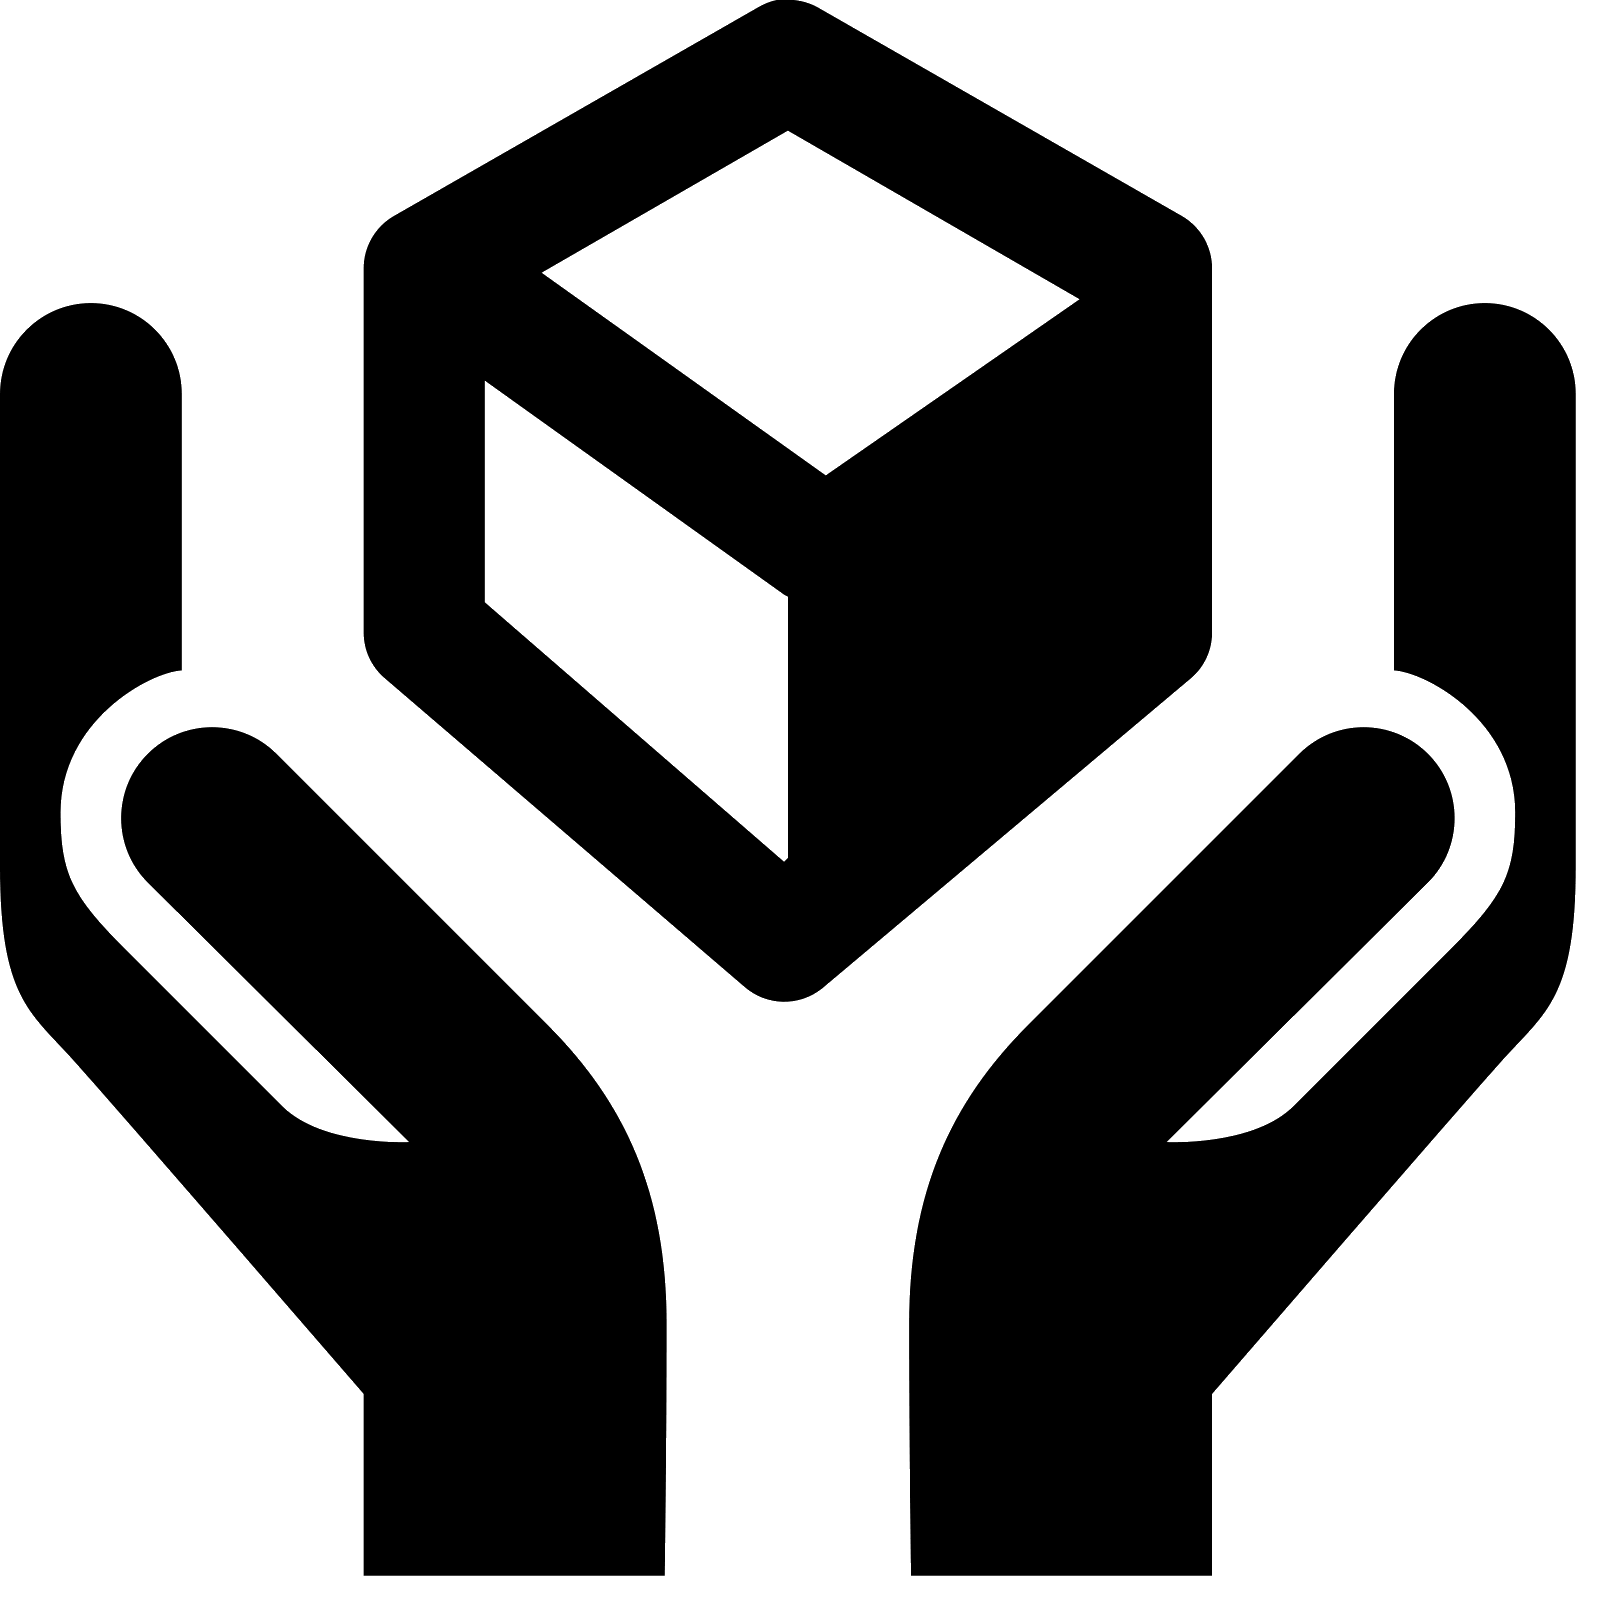 2 Hands Logo - Two hands logo png 5 PNG Image